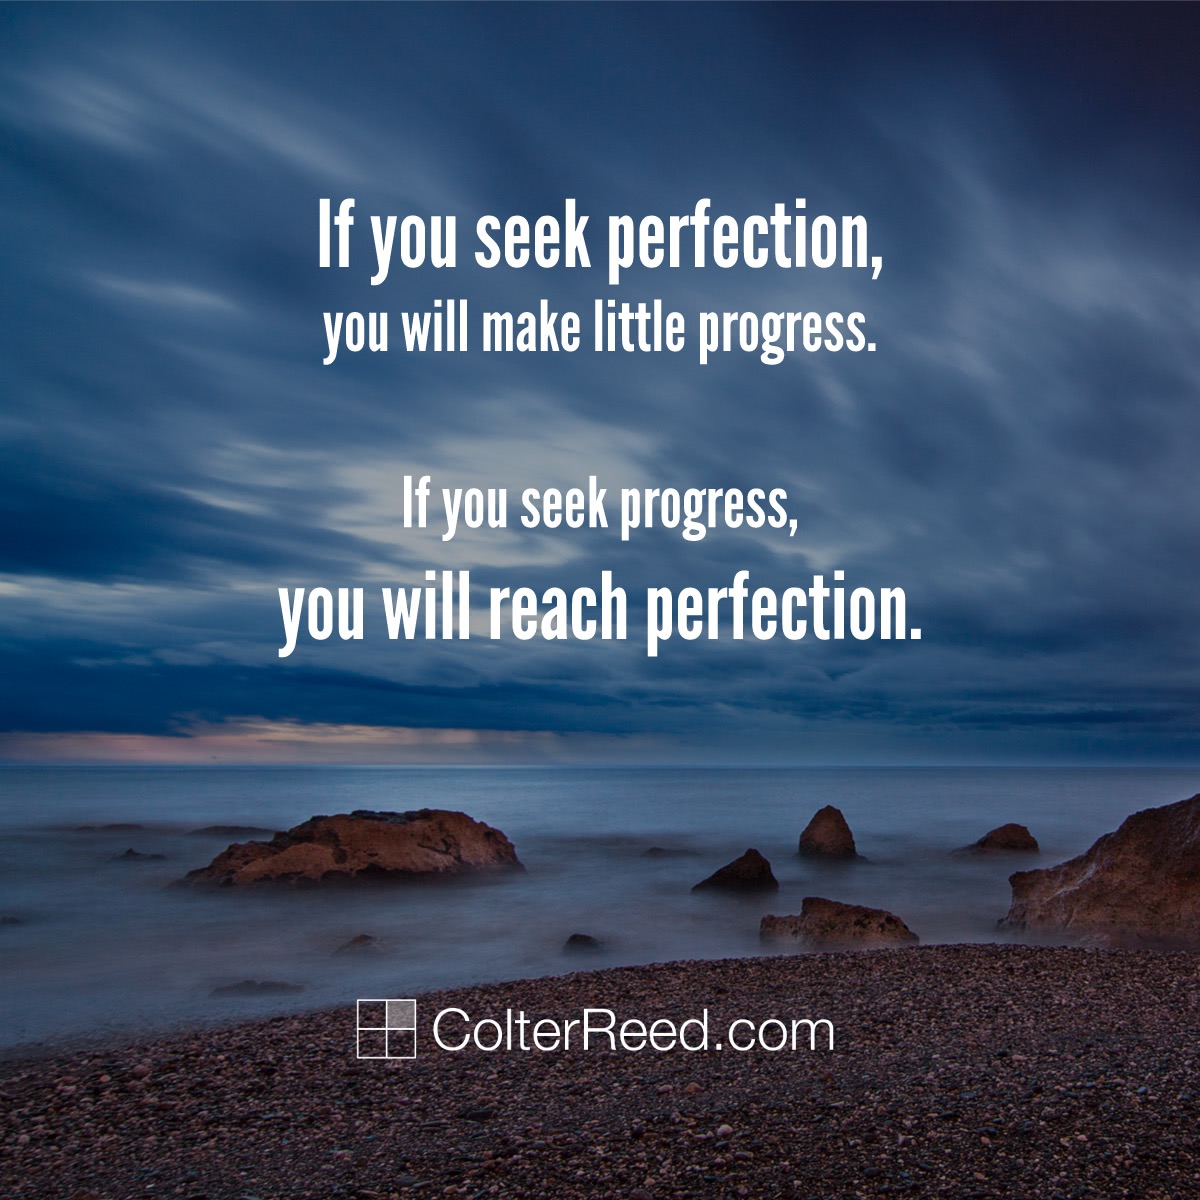 If you seek perfection, you will make little progress. If you seek progress, you will reach perfection. —Colter Reed